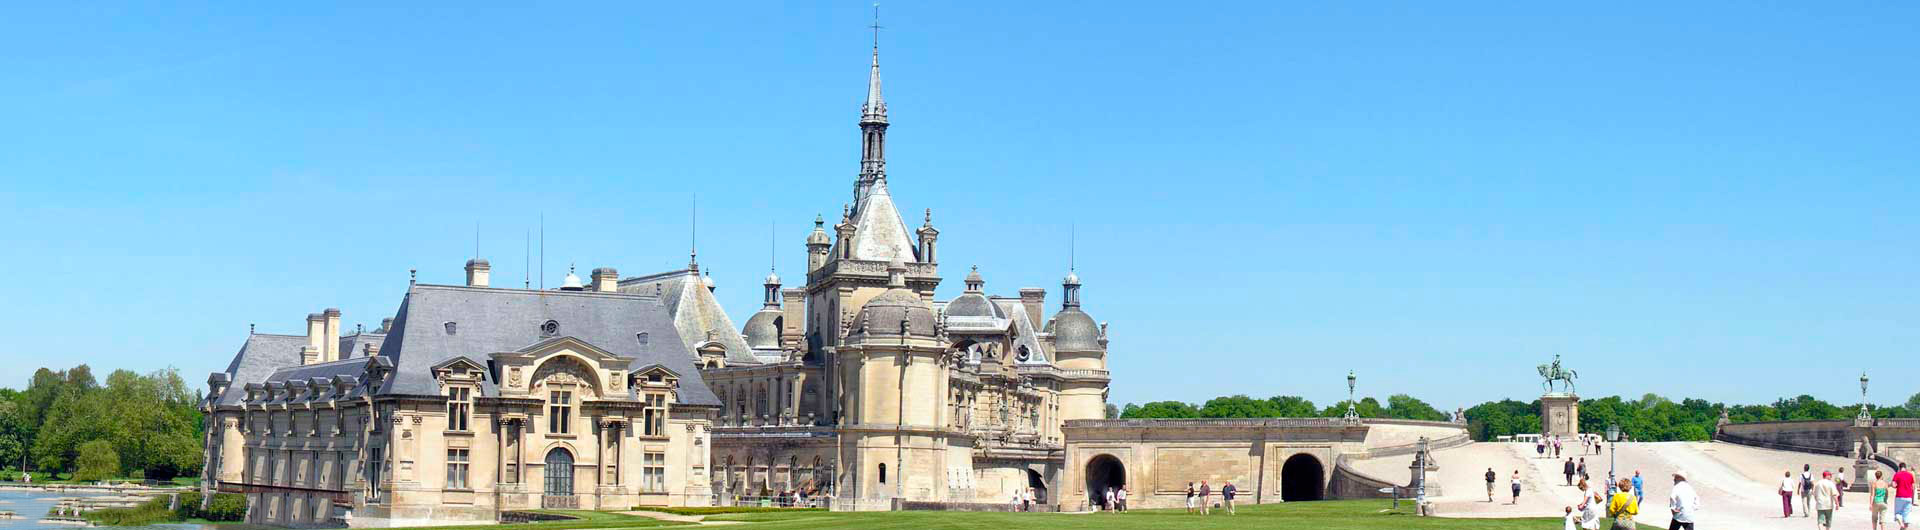 Guided tour of the Château de Chantilly